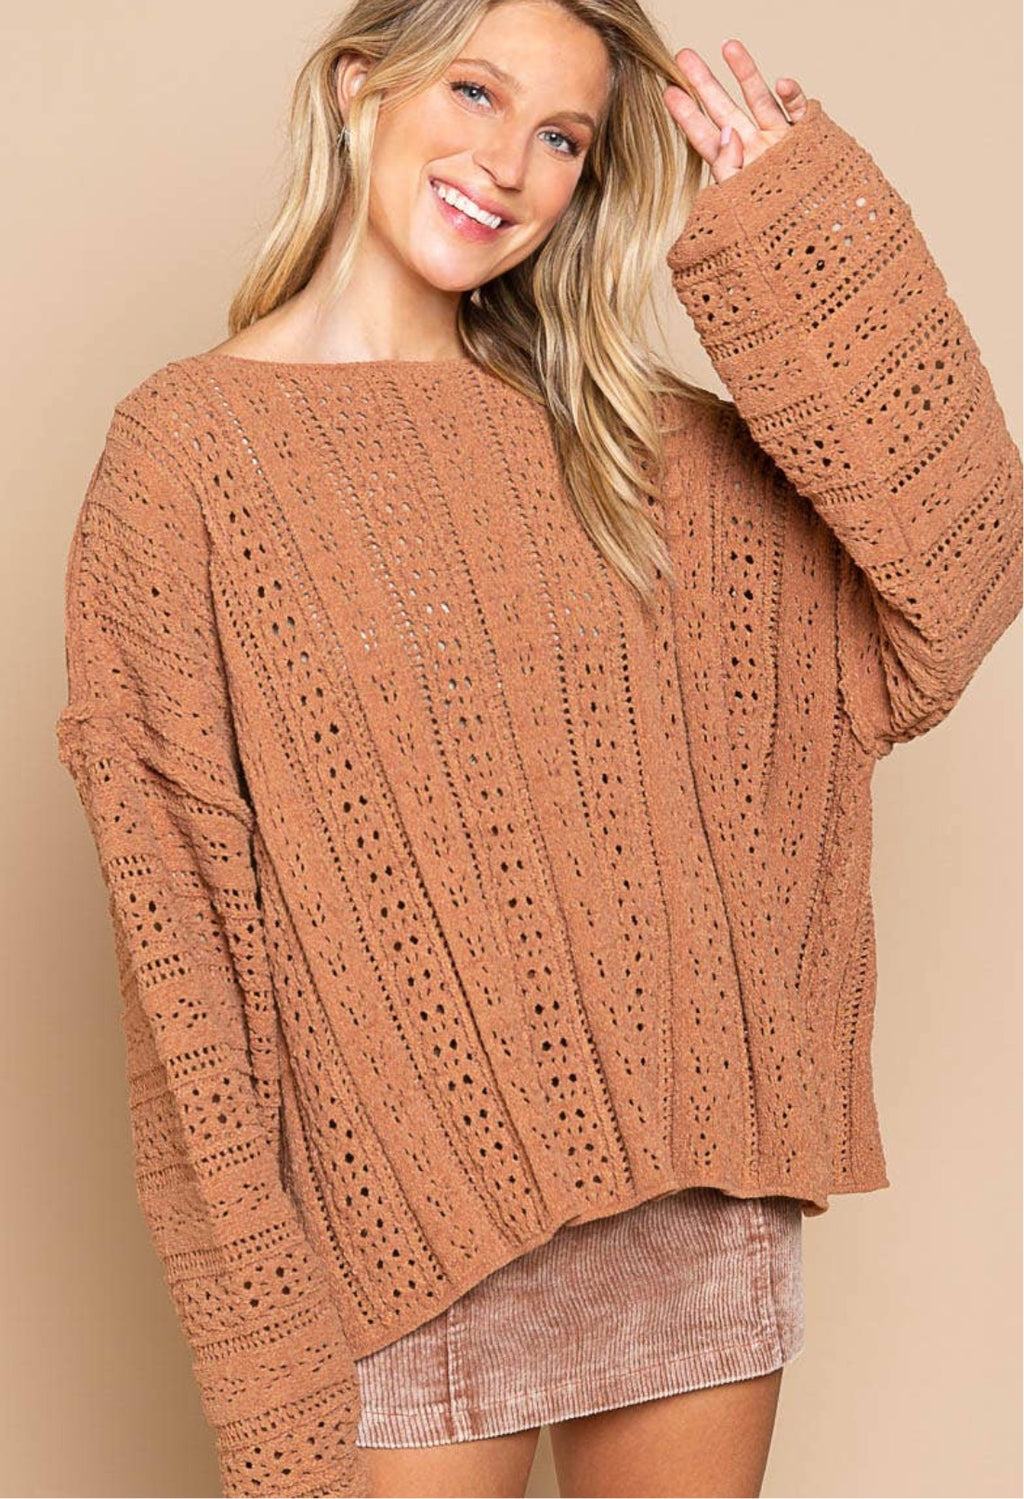 The Meredith Sweater